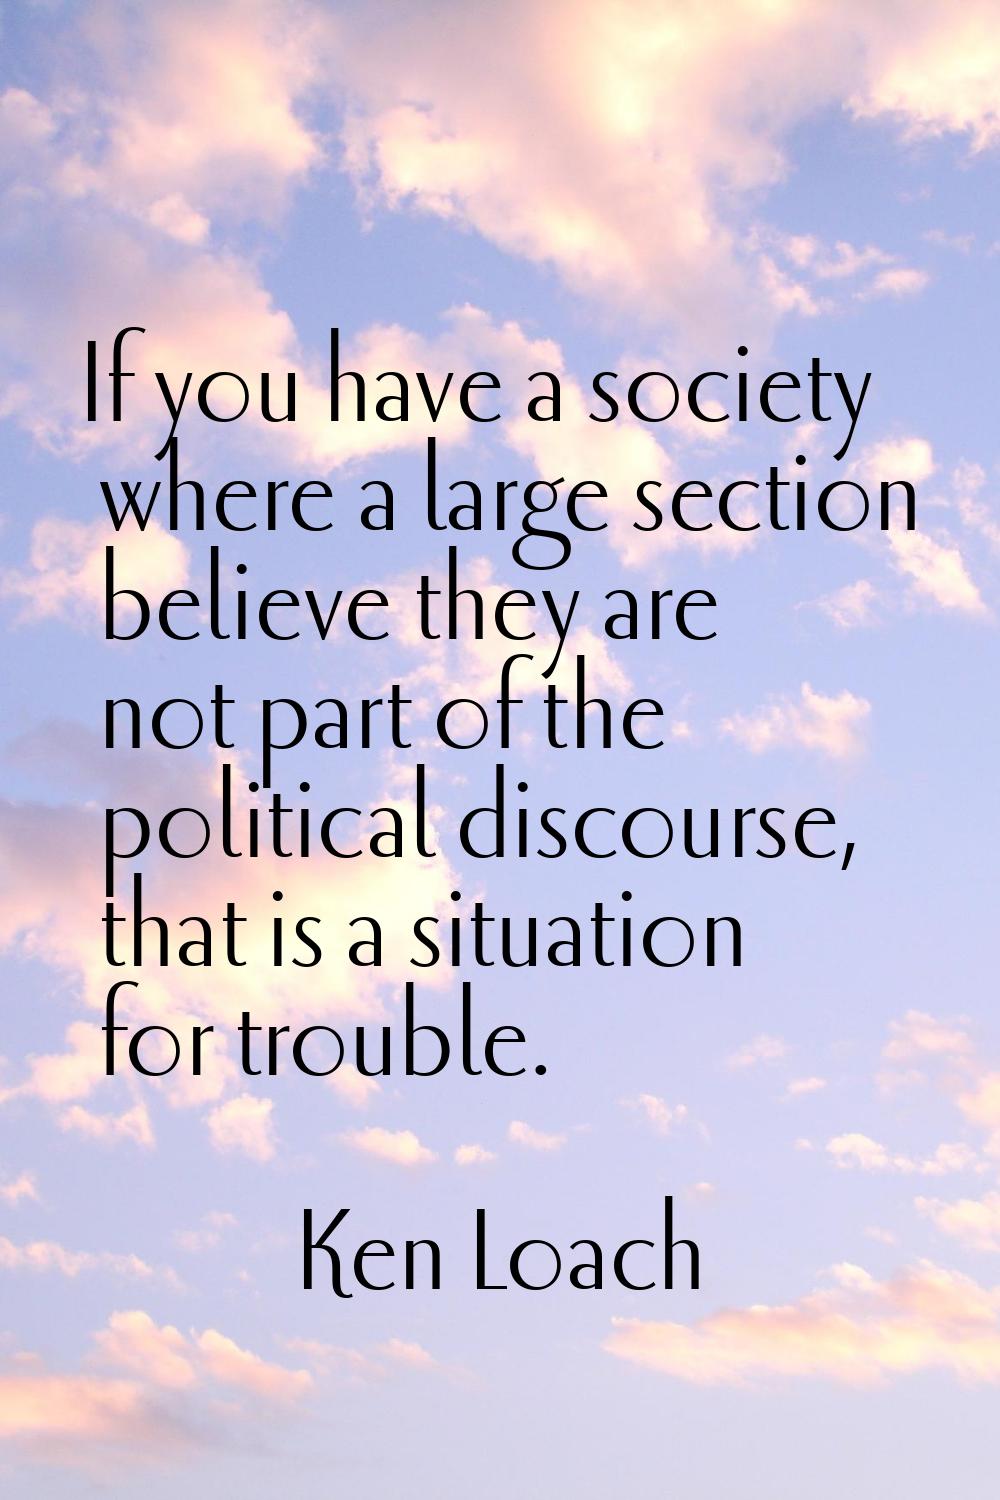 If you have a society where a large section believe they are not part of the political discourse, t